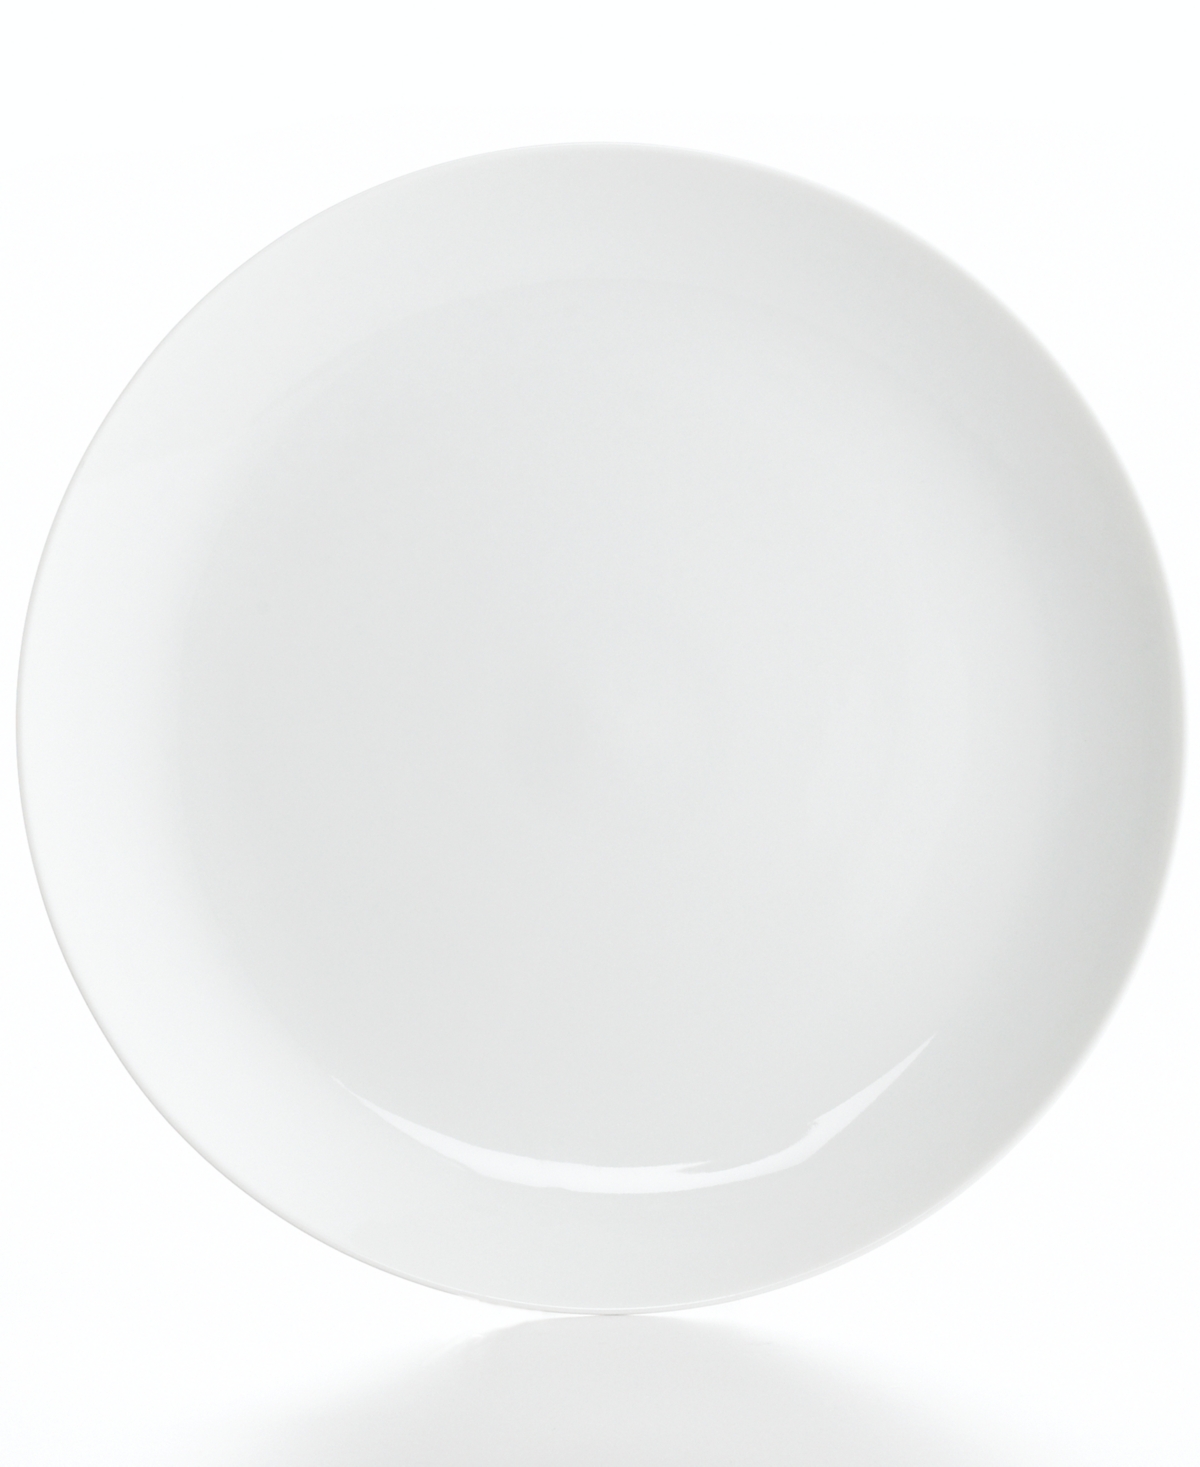 Whiteware Coupe Dinner Plate, Created for Macy's